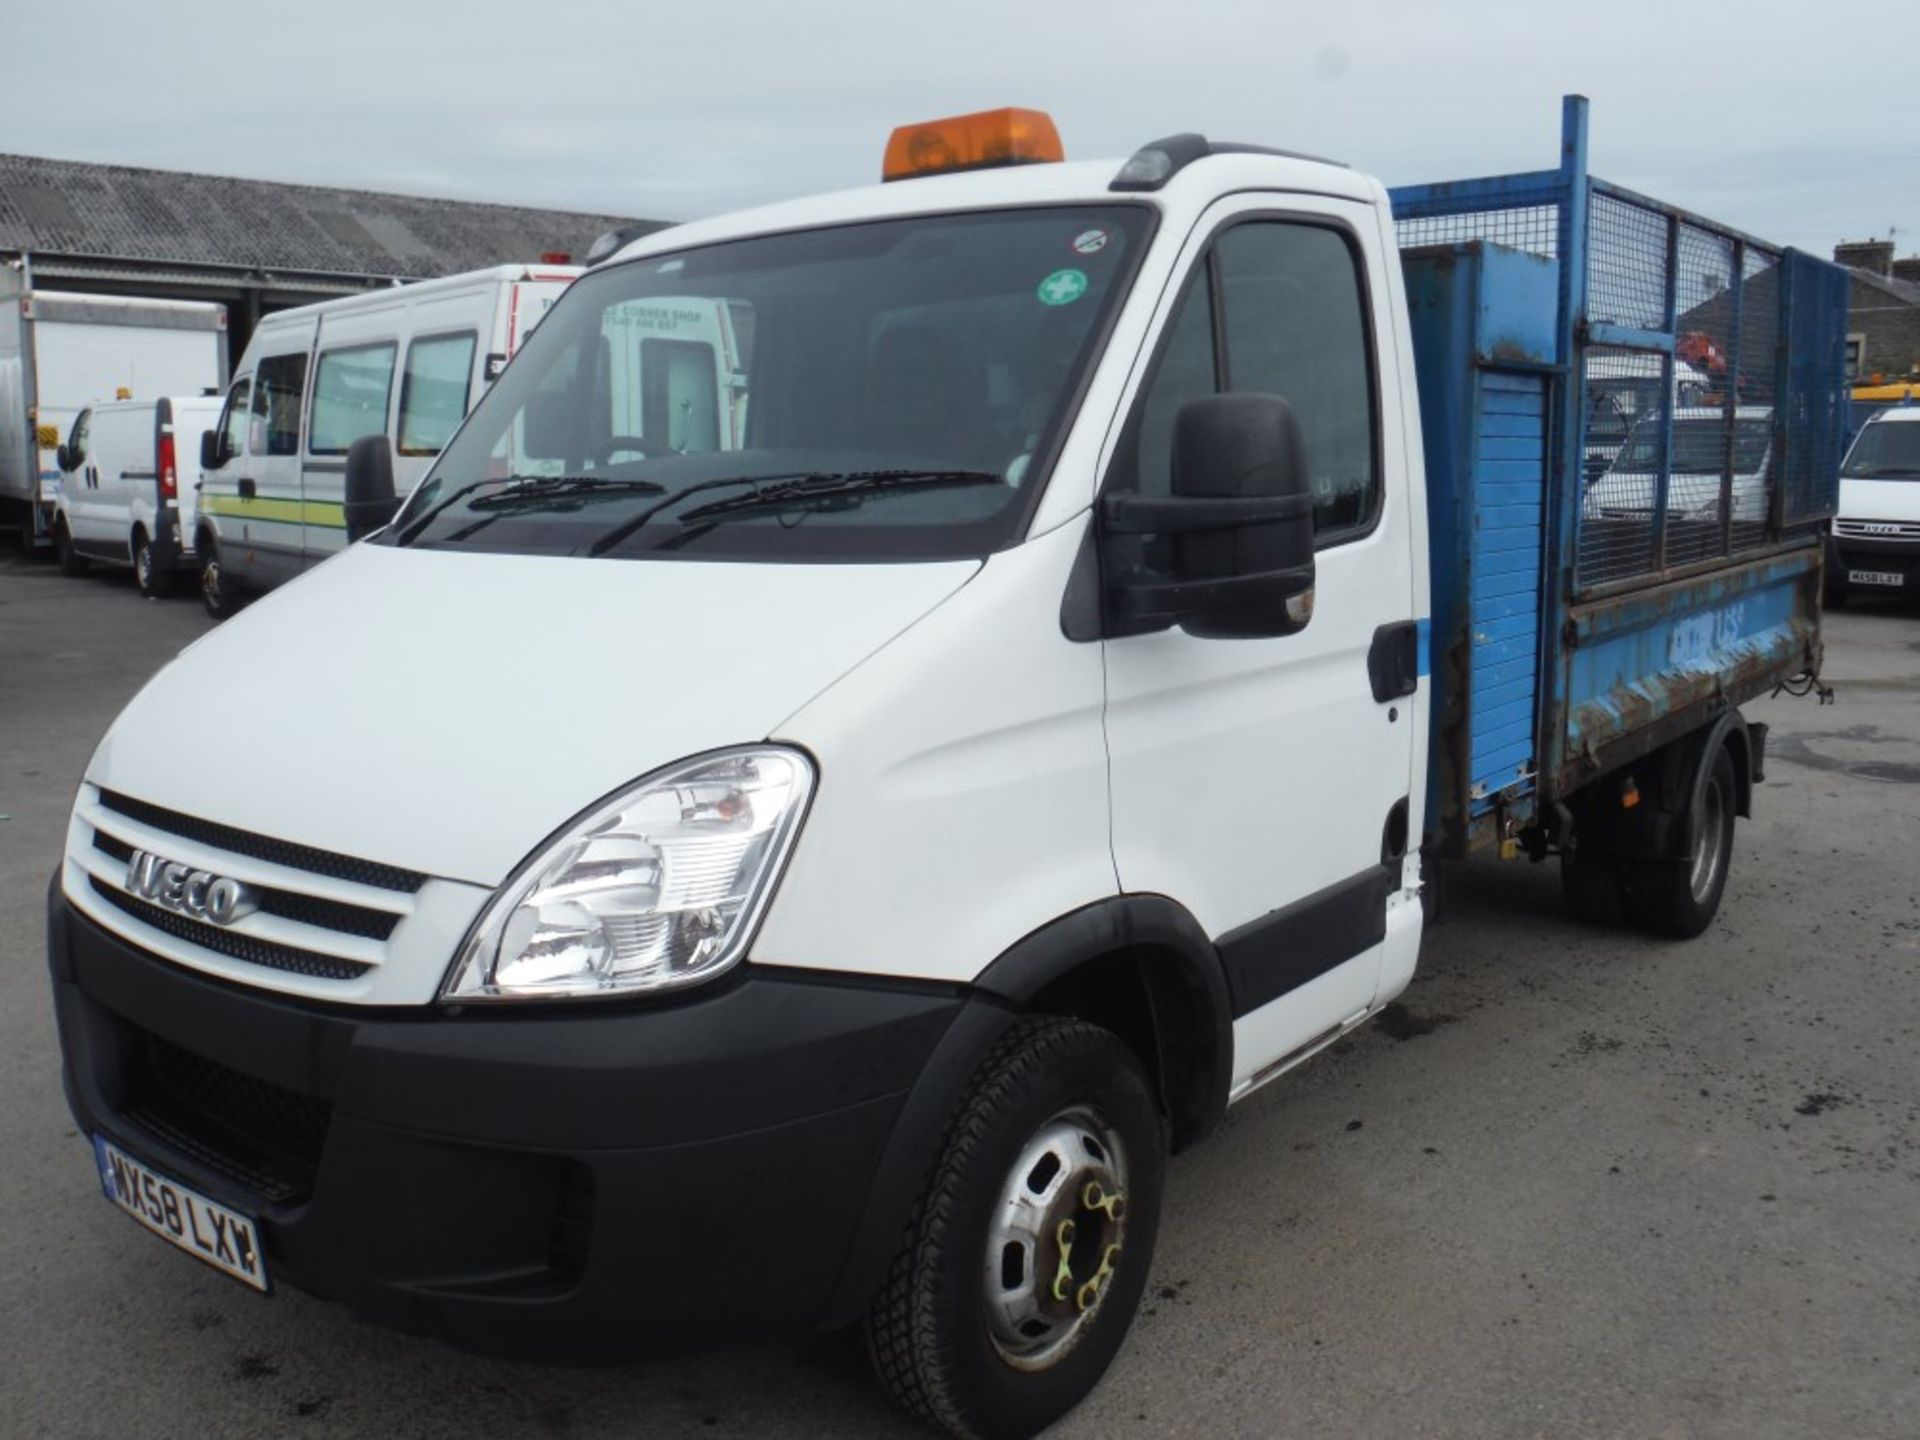 58 reg IVECO DAILY 50C15 CAGED TIPPER, 1ST REG 10/08, TEST 06/15, 141129M, V5 HERE, 1 OWNER FROM NEW - Image 2 of 5